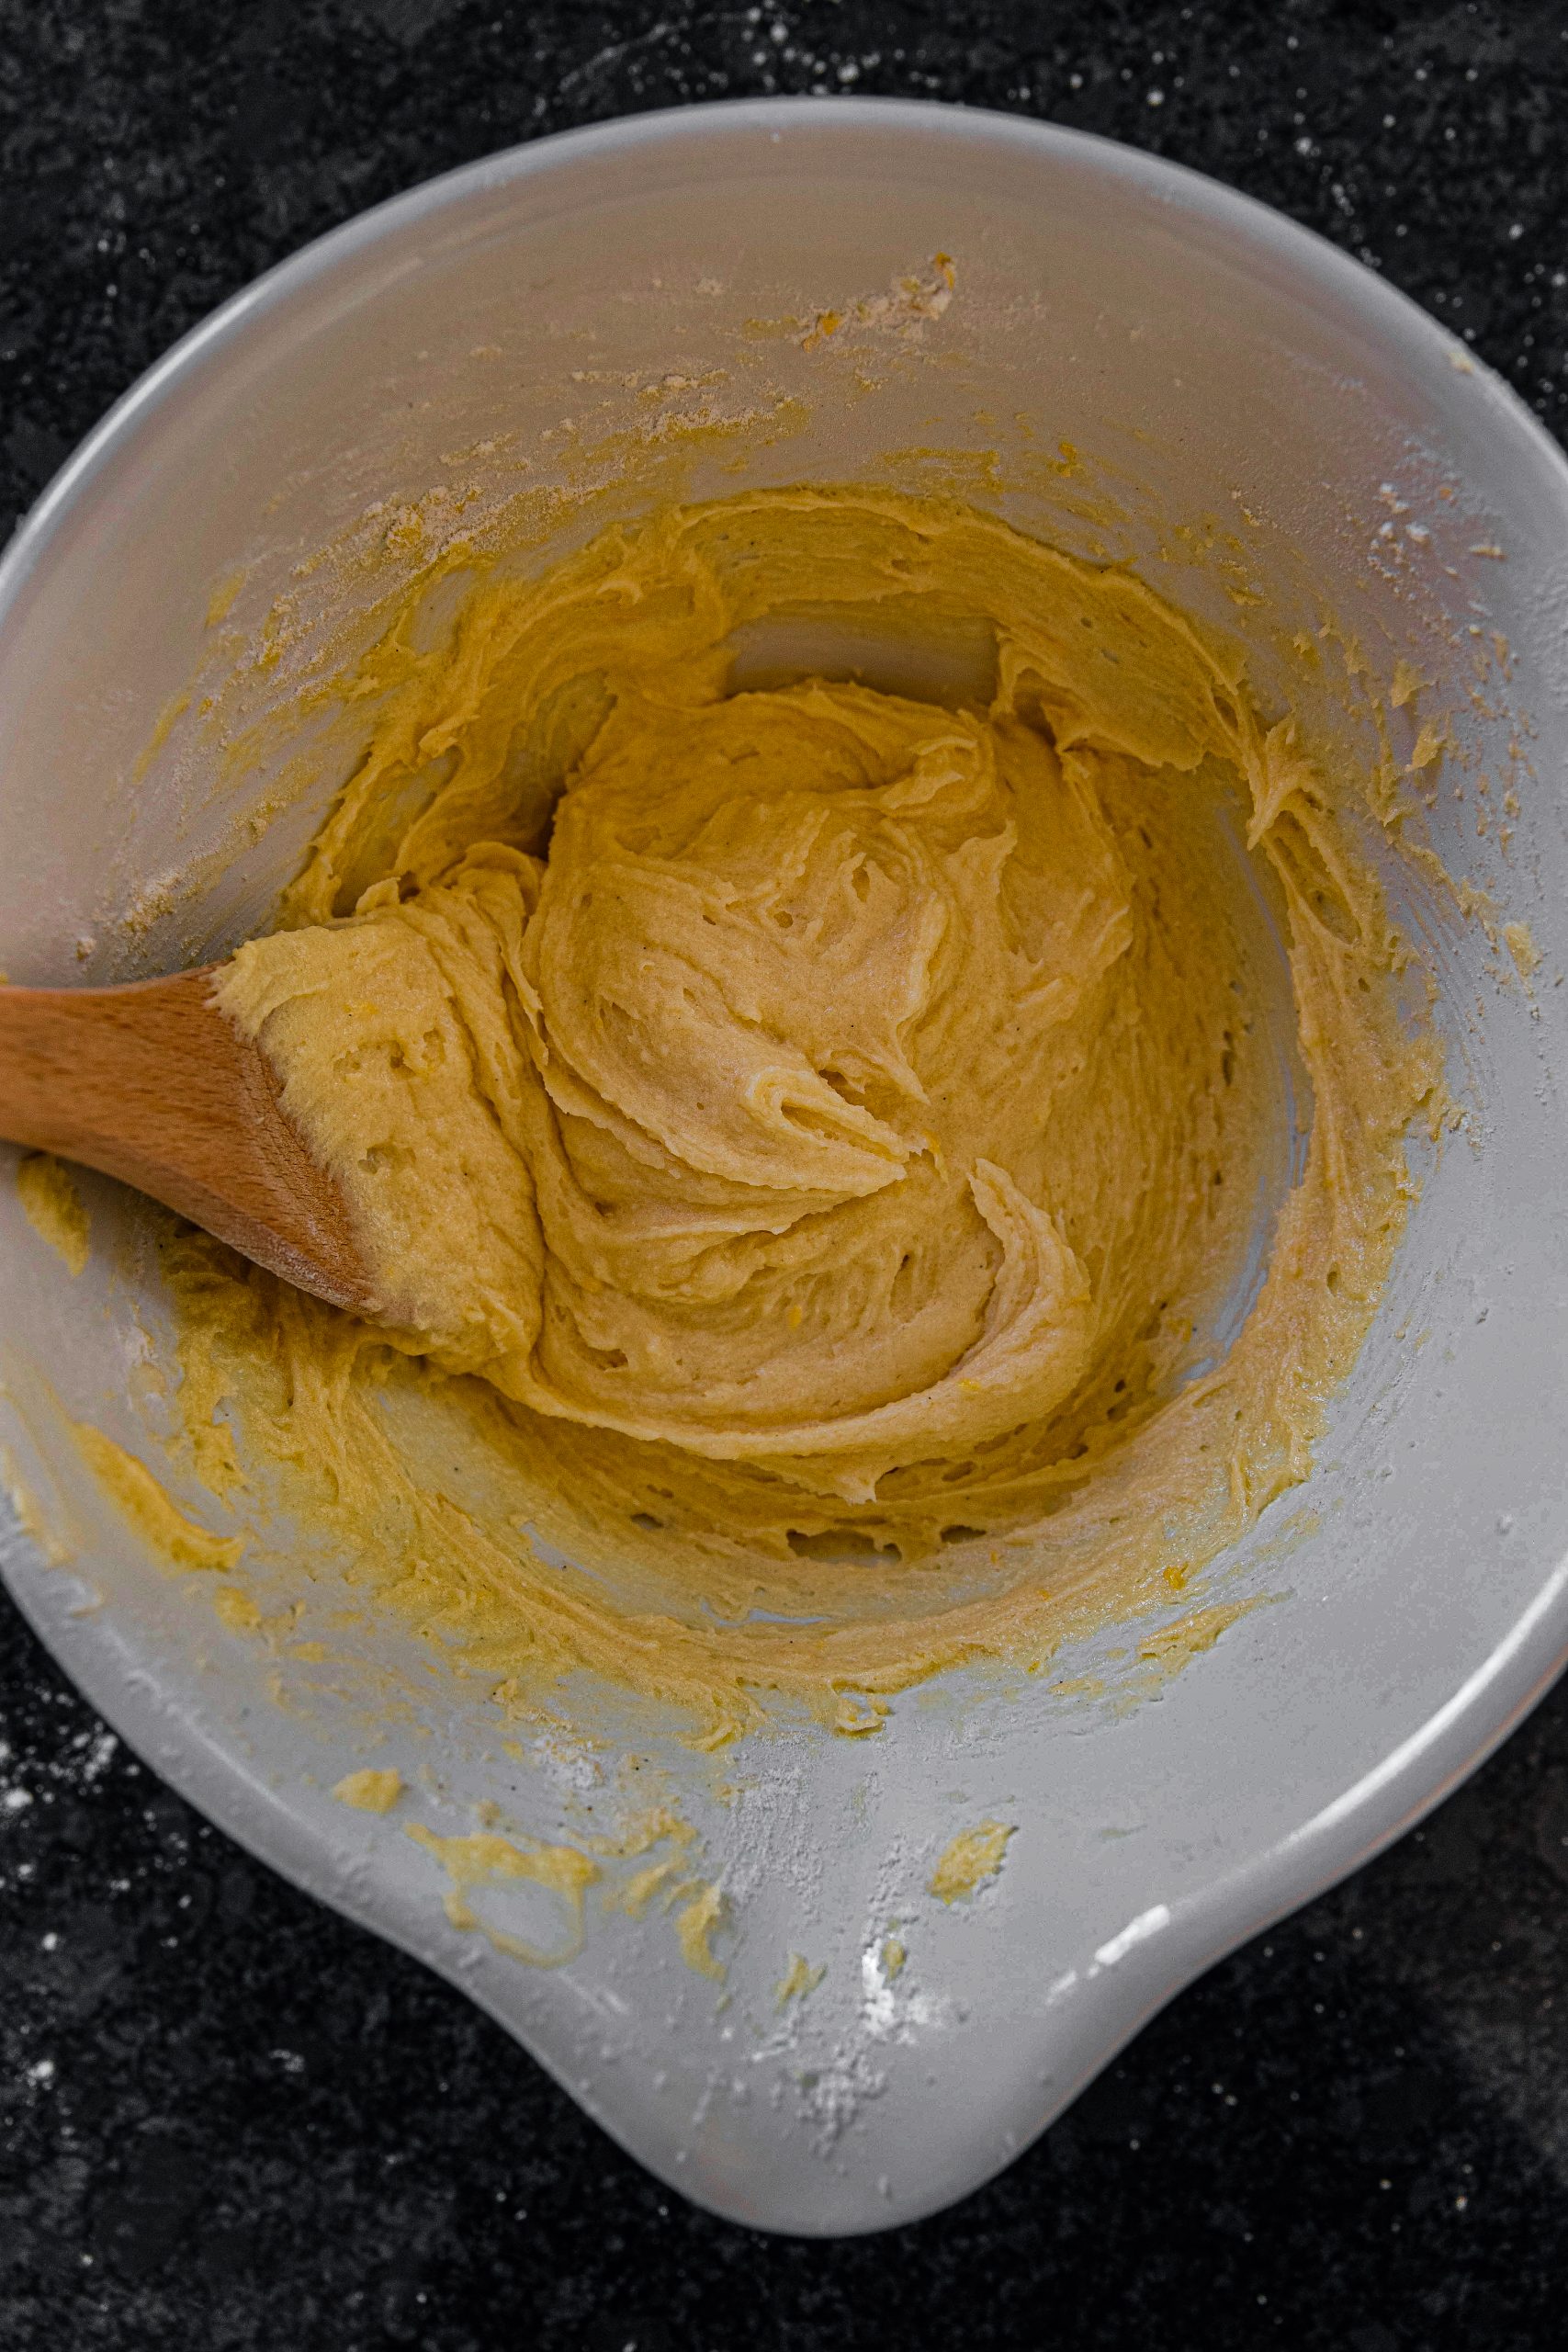 Add in the flour, lemon zest and water into the bowl and stir until it’s well mixed. Make sure it’s not lumpy!